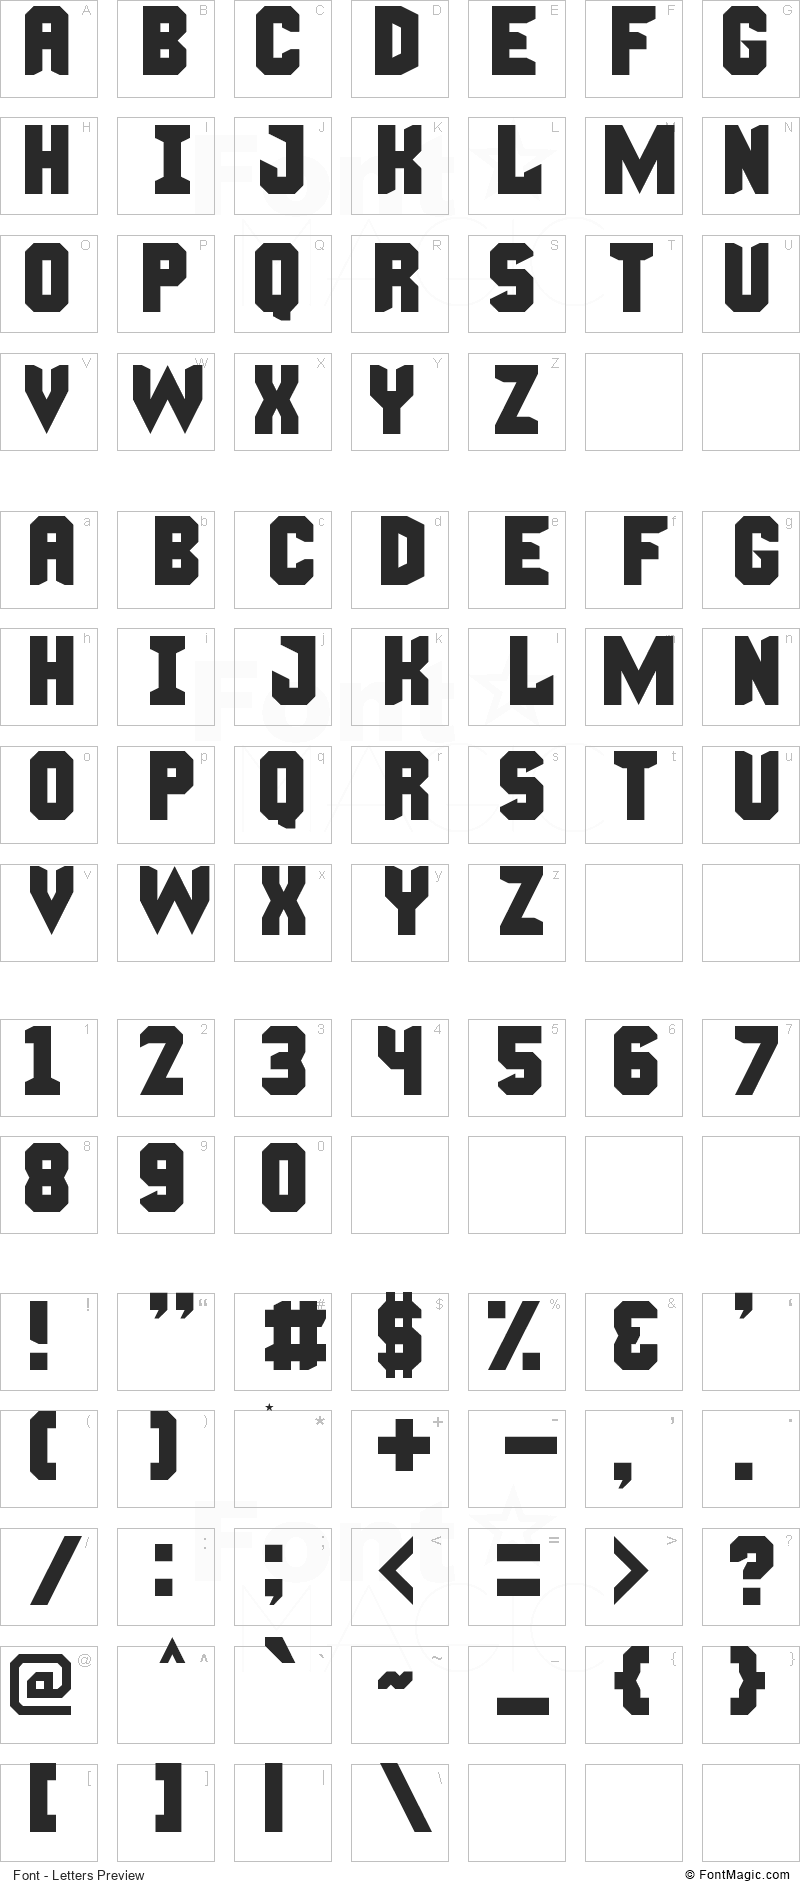 Manly Man Font - All Latters Preview Chart